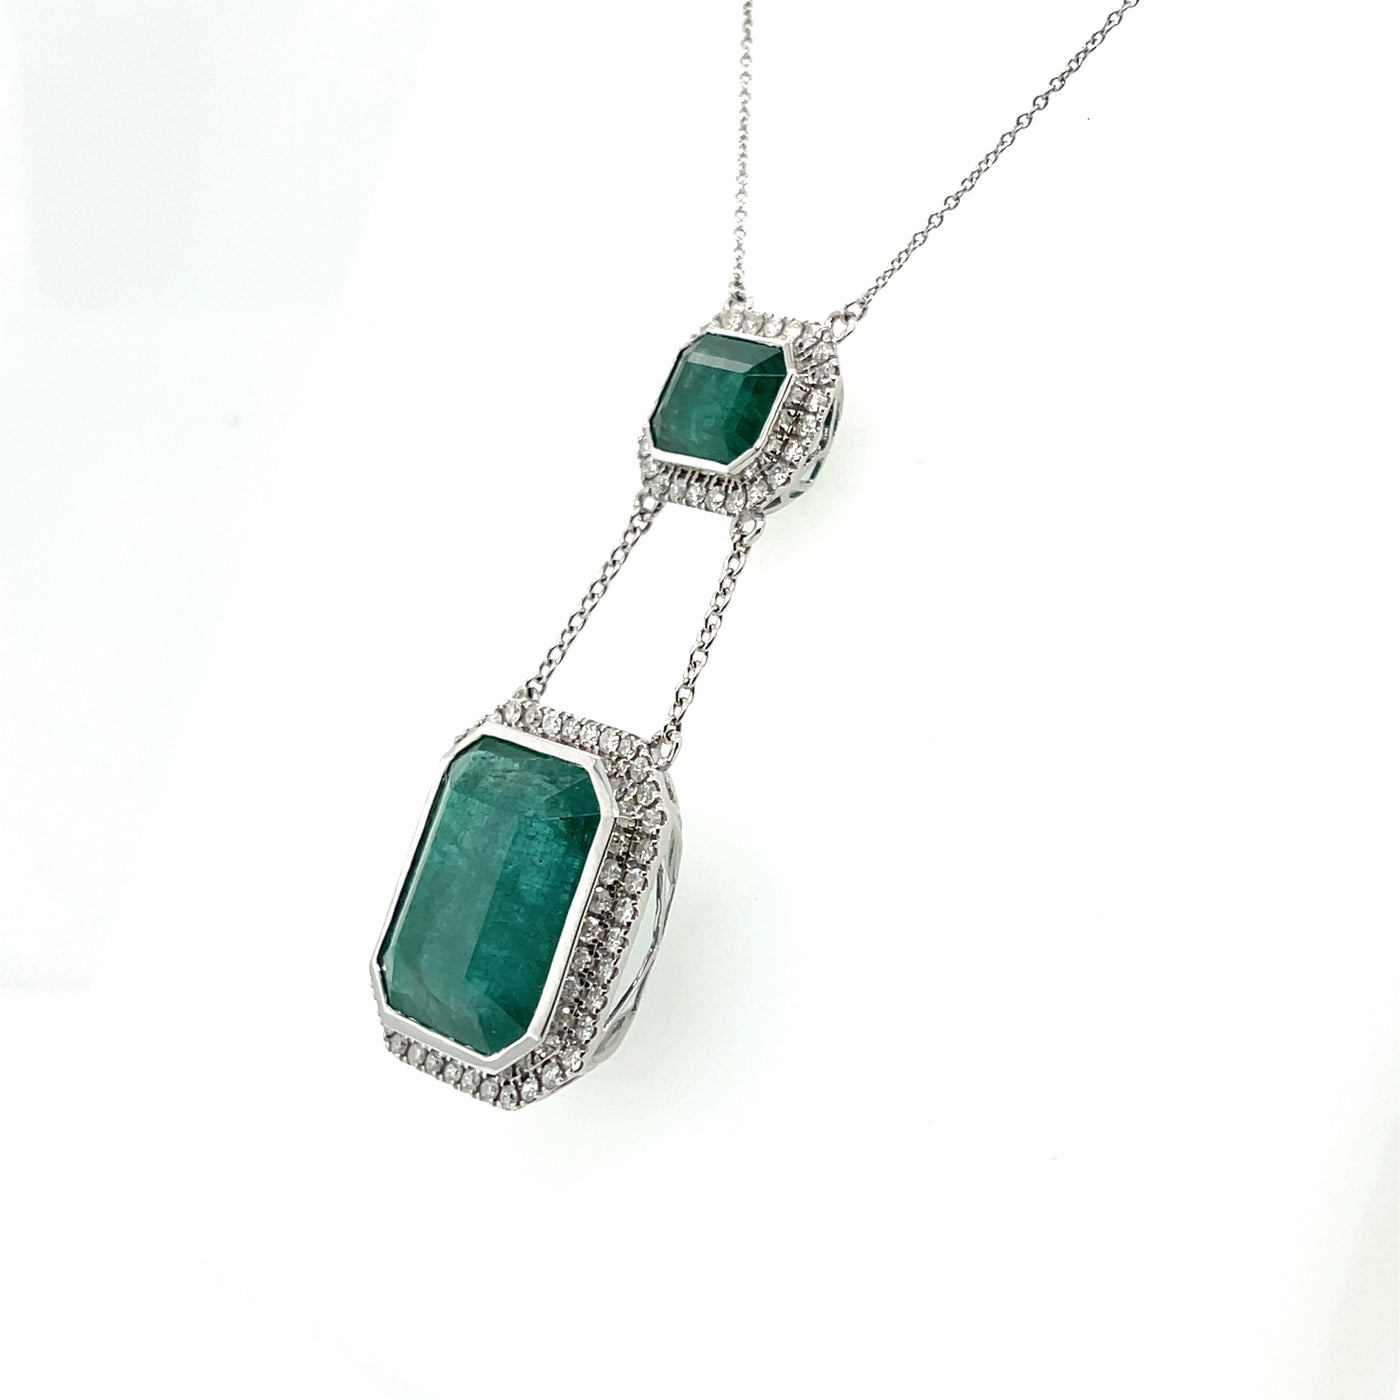 18ct white gold double emerald pendant and diamond necklace